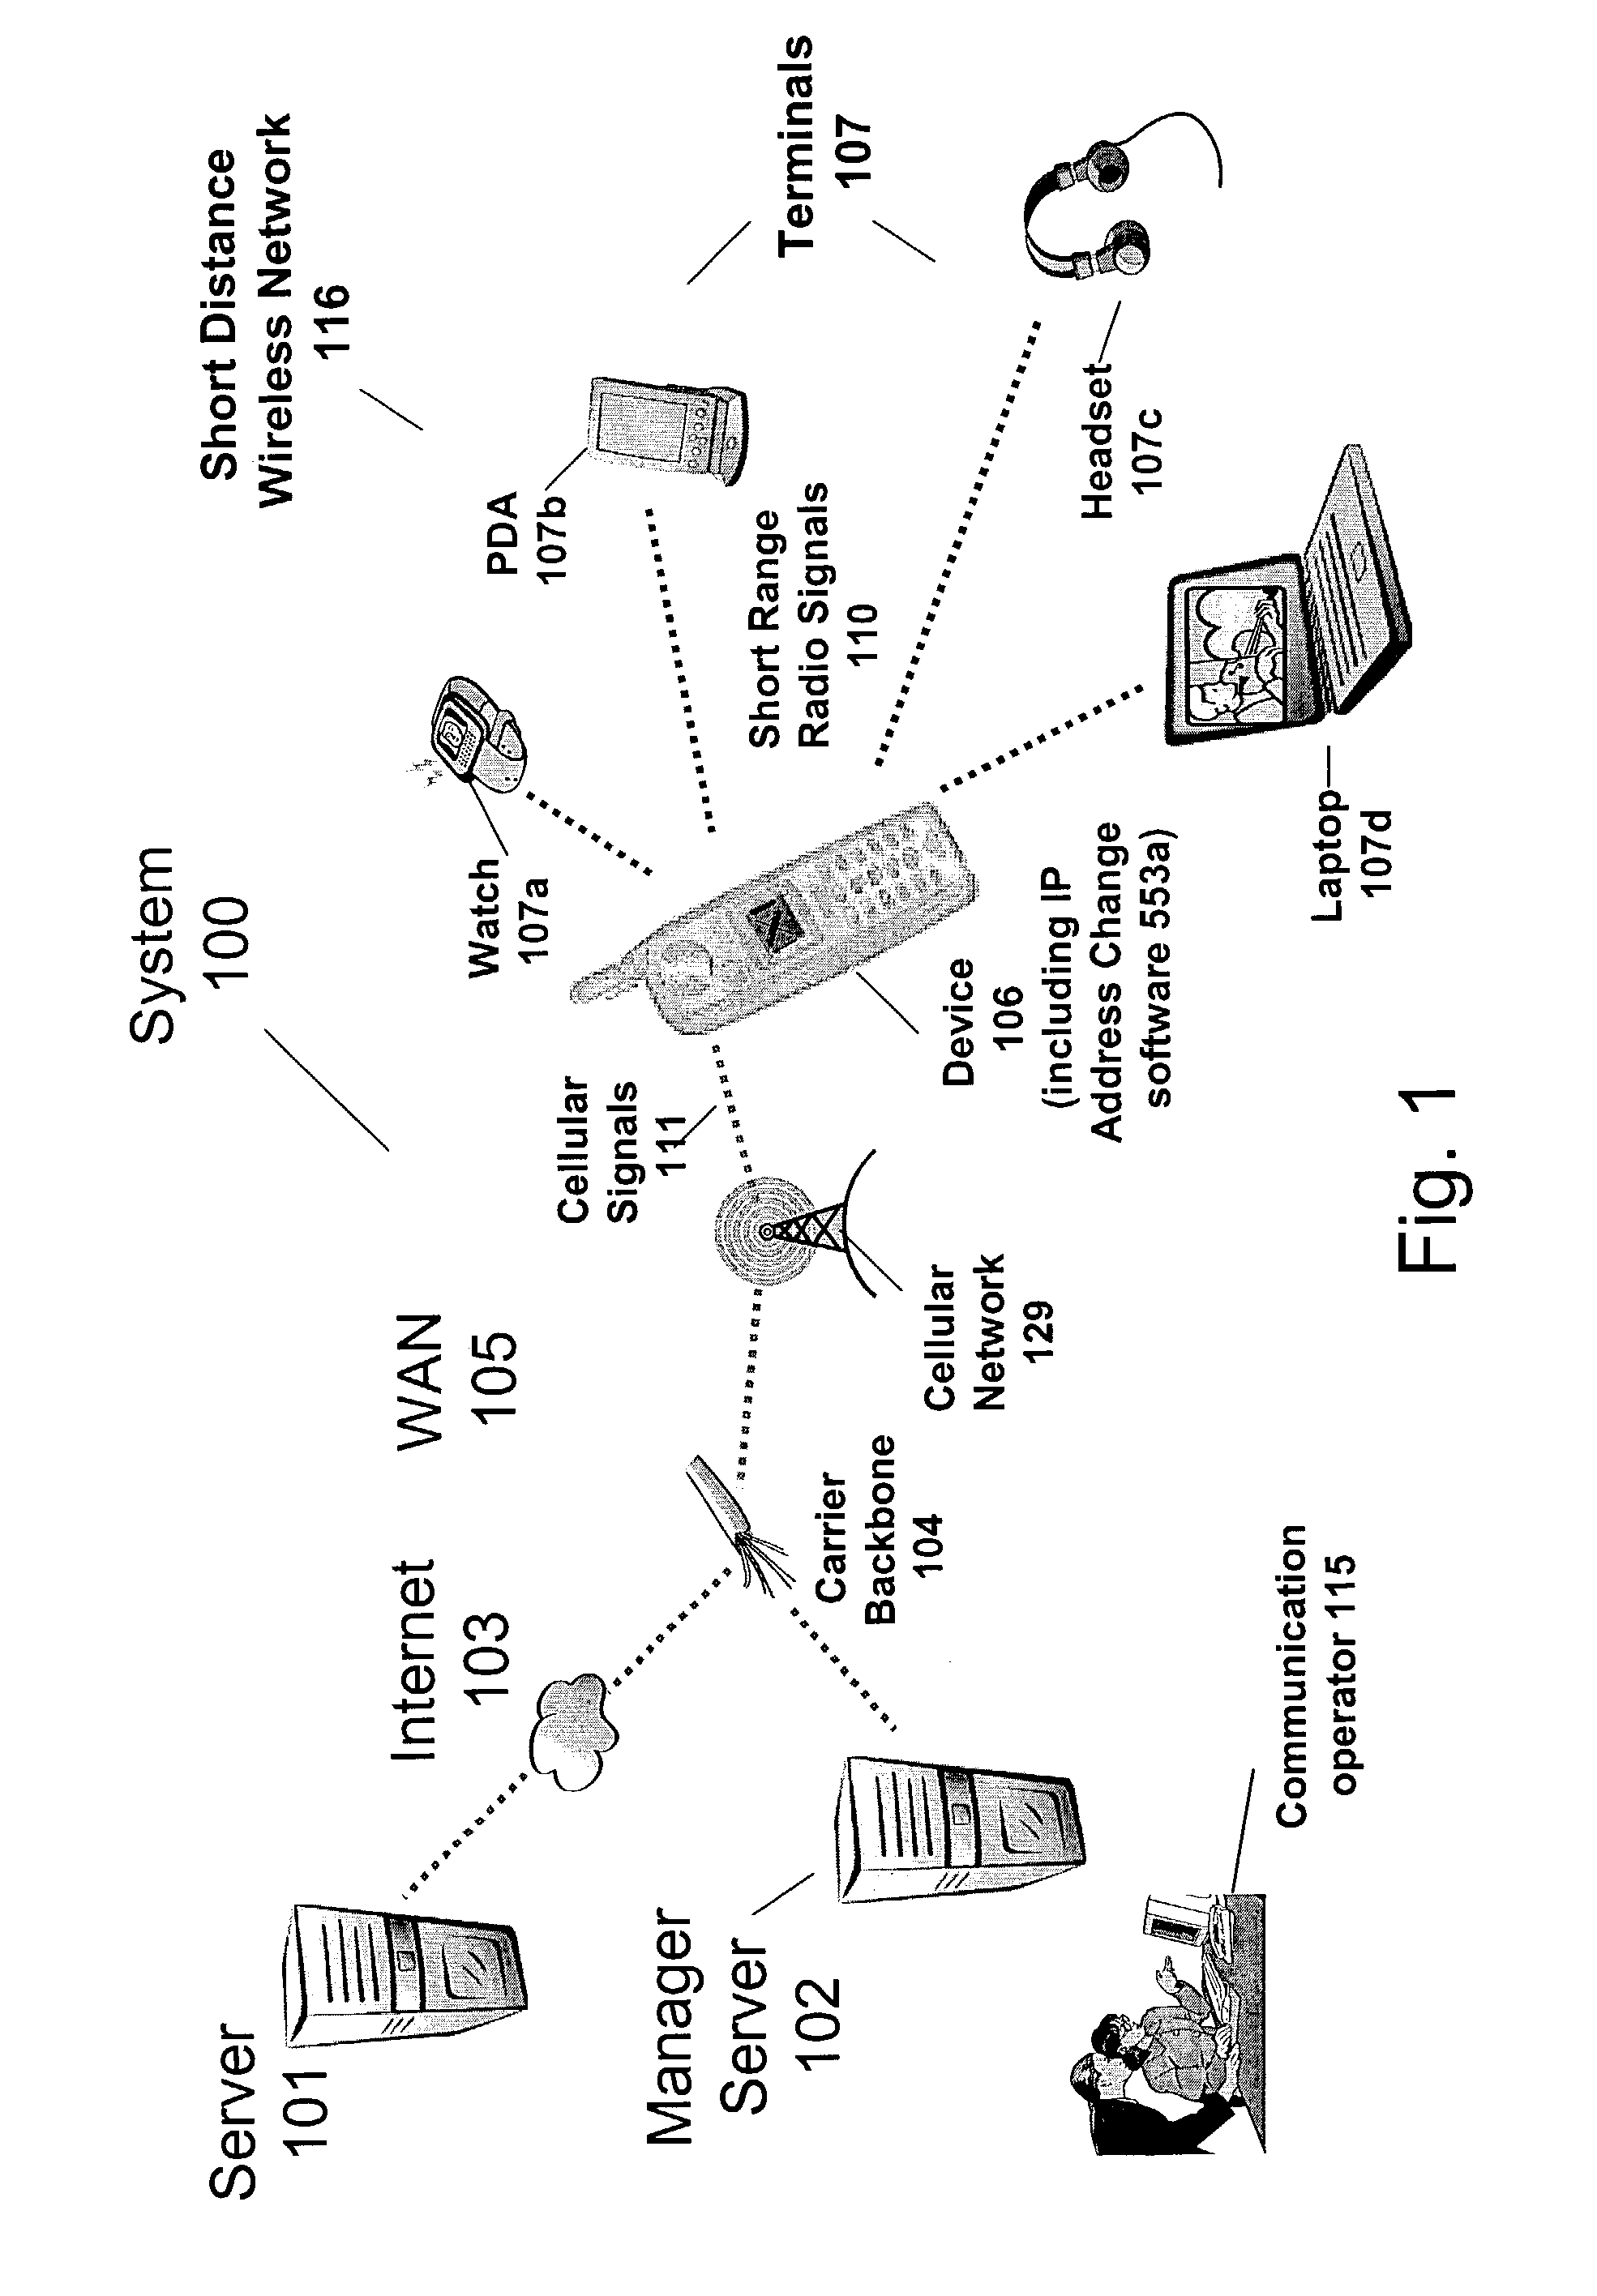 Device, system, method and computer readable medium for fast recovery of IP address change